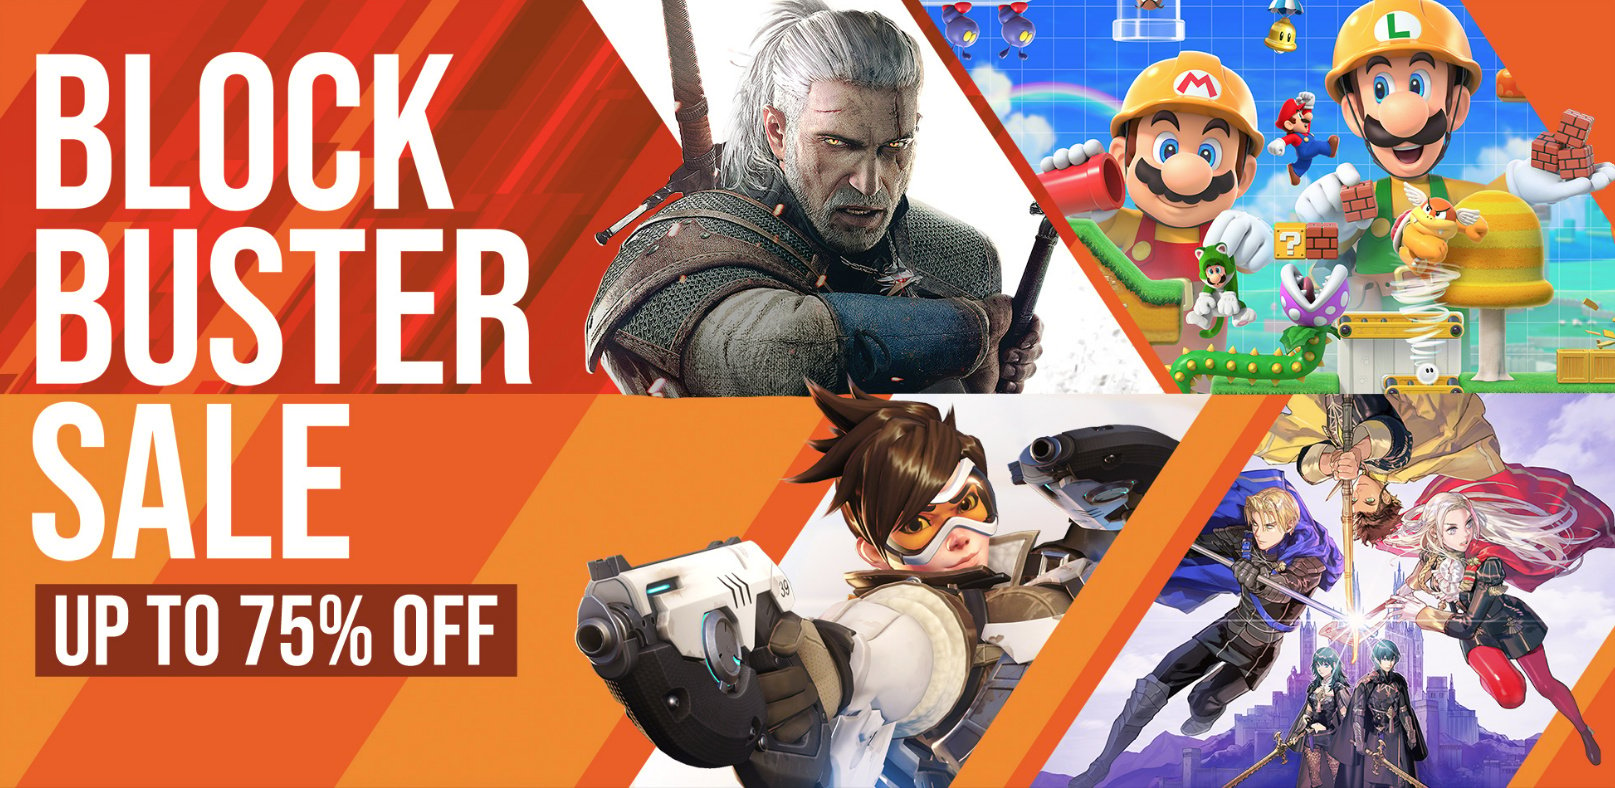 switch games on sale now